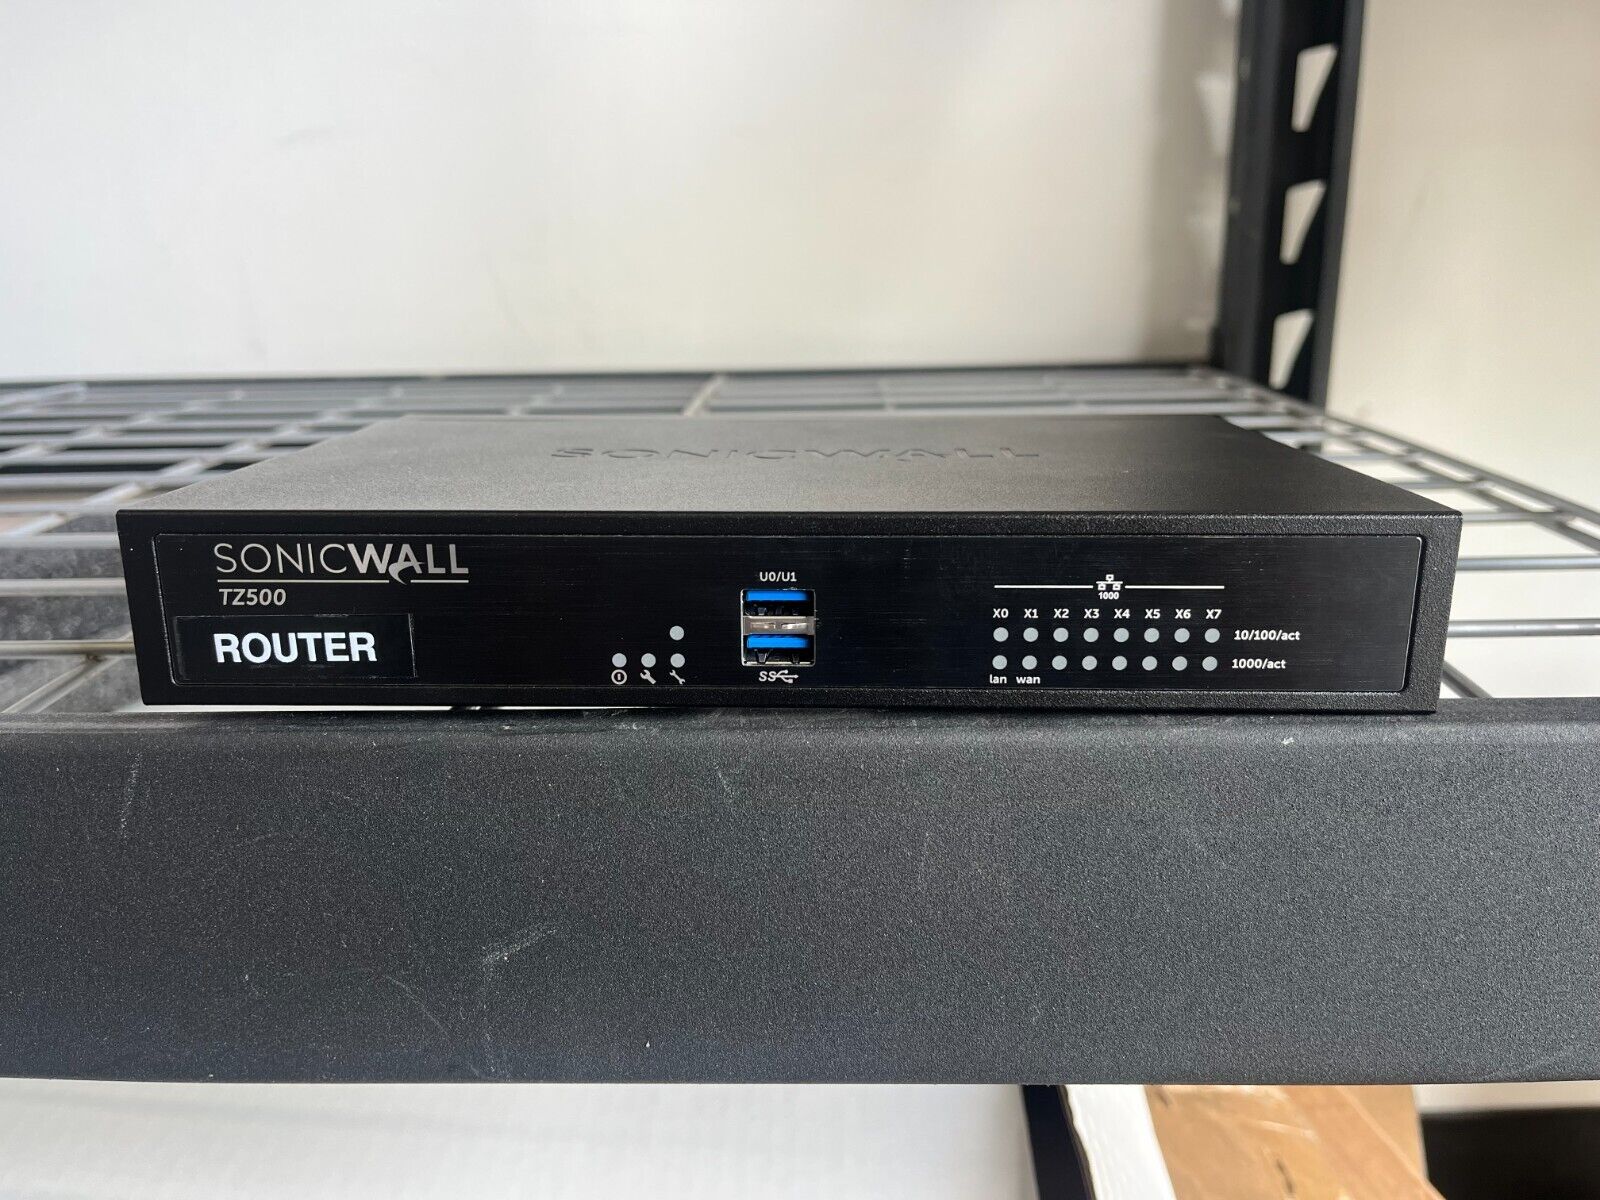 SonicWall TZ500 Firewall / Router 8-Port Network Security Appliance - Tested